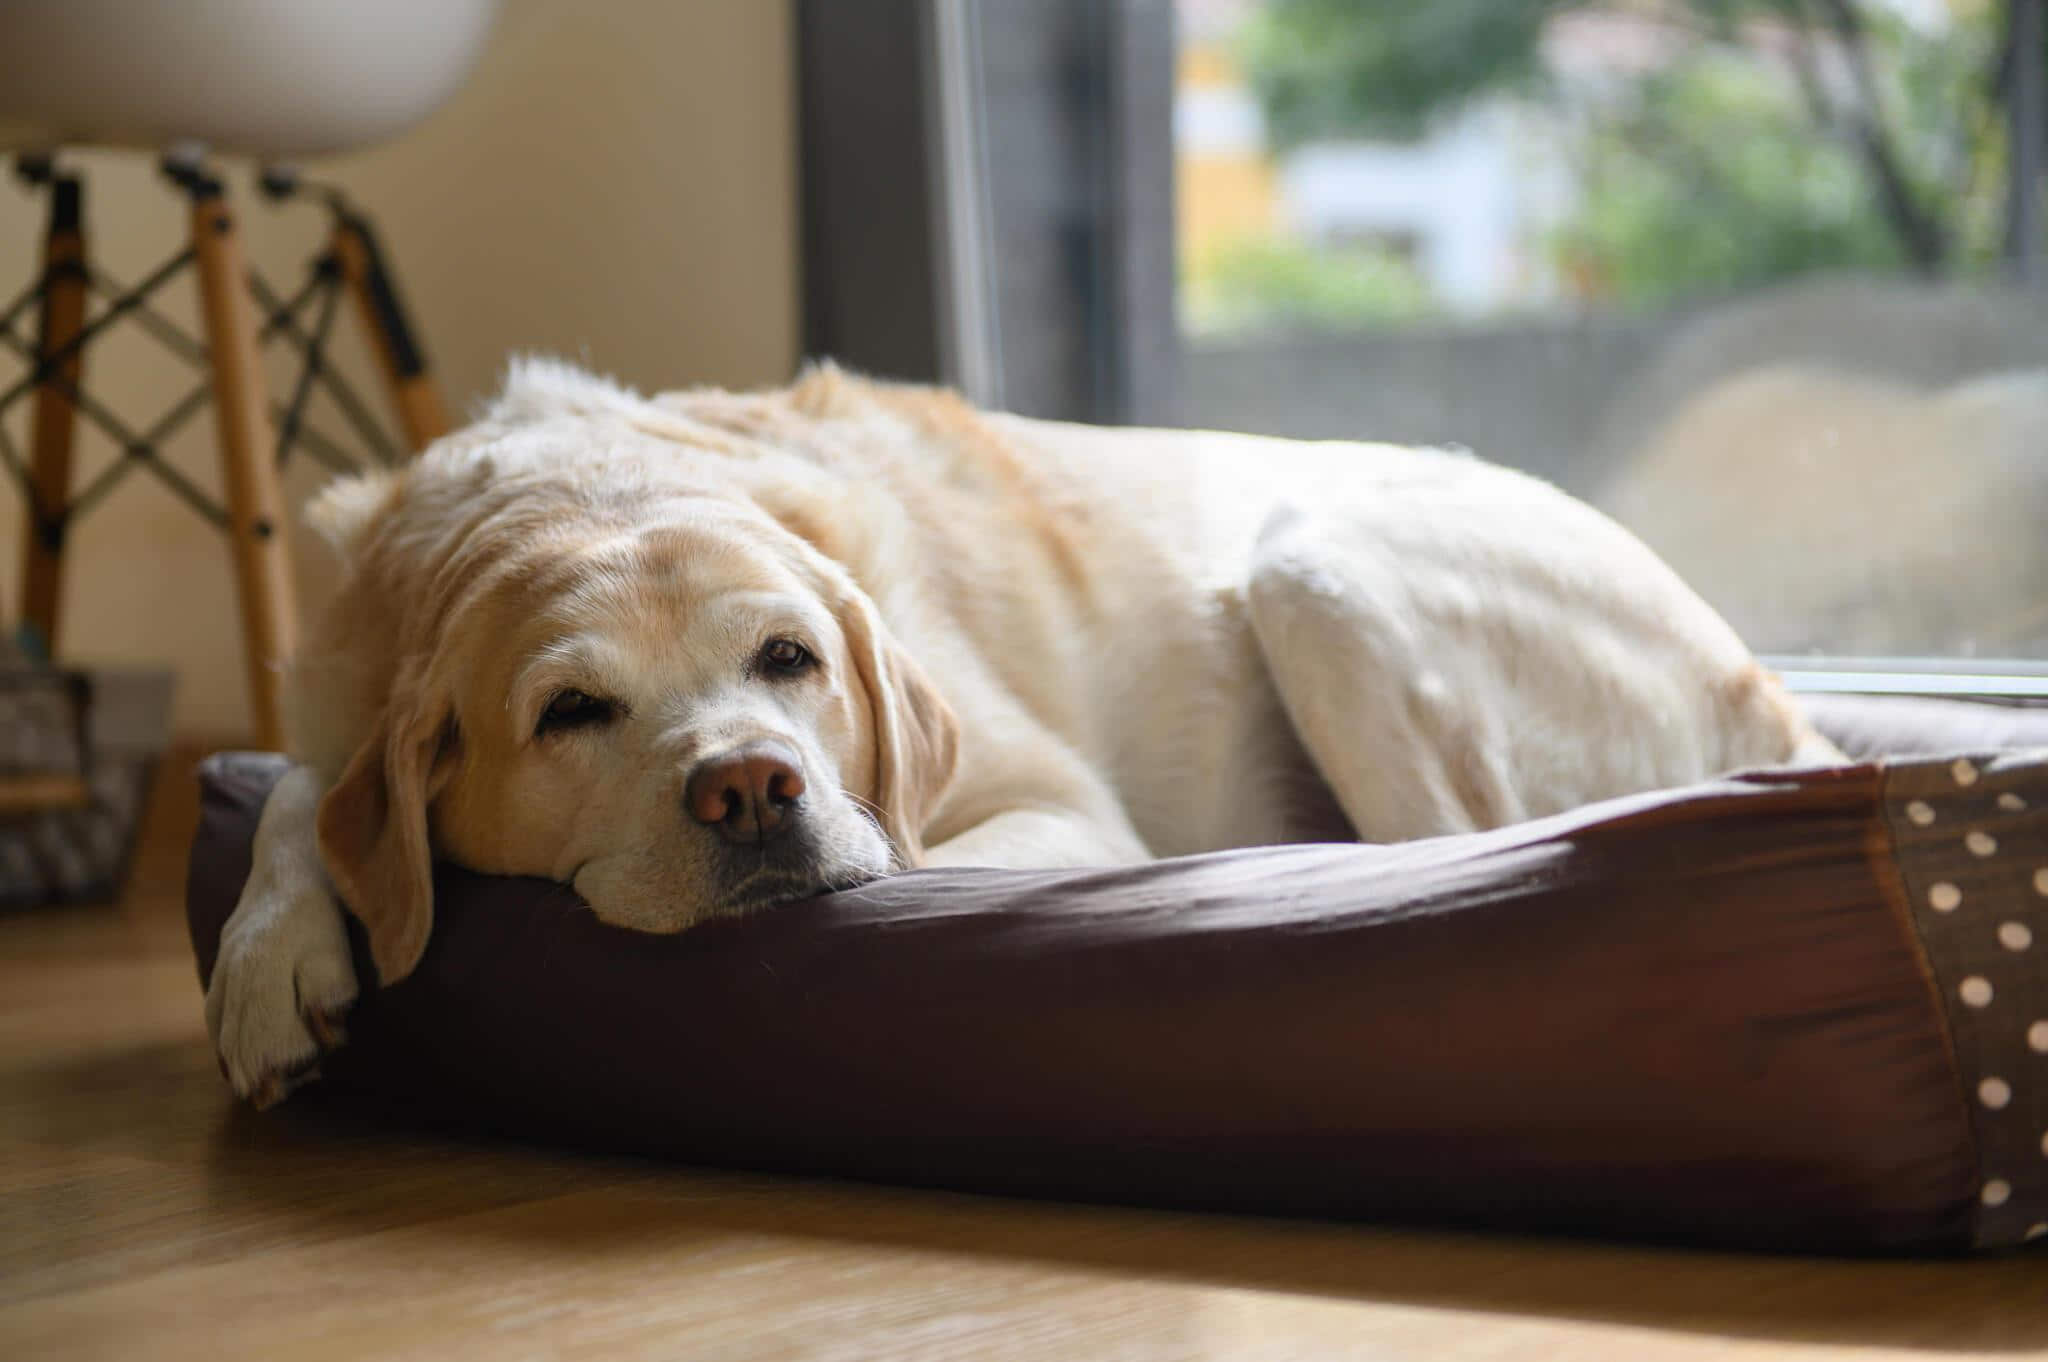 a lazy dog lying on a brown color mattress